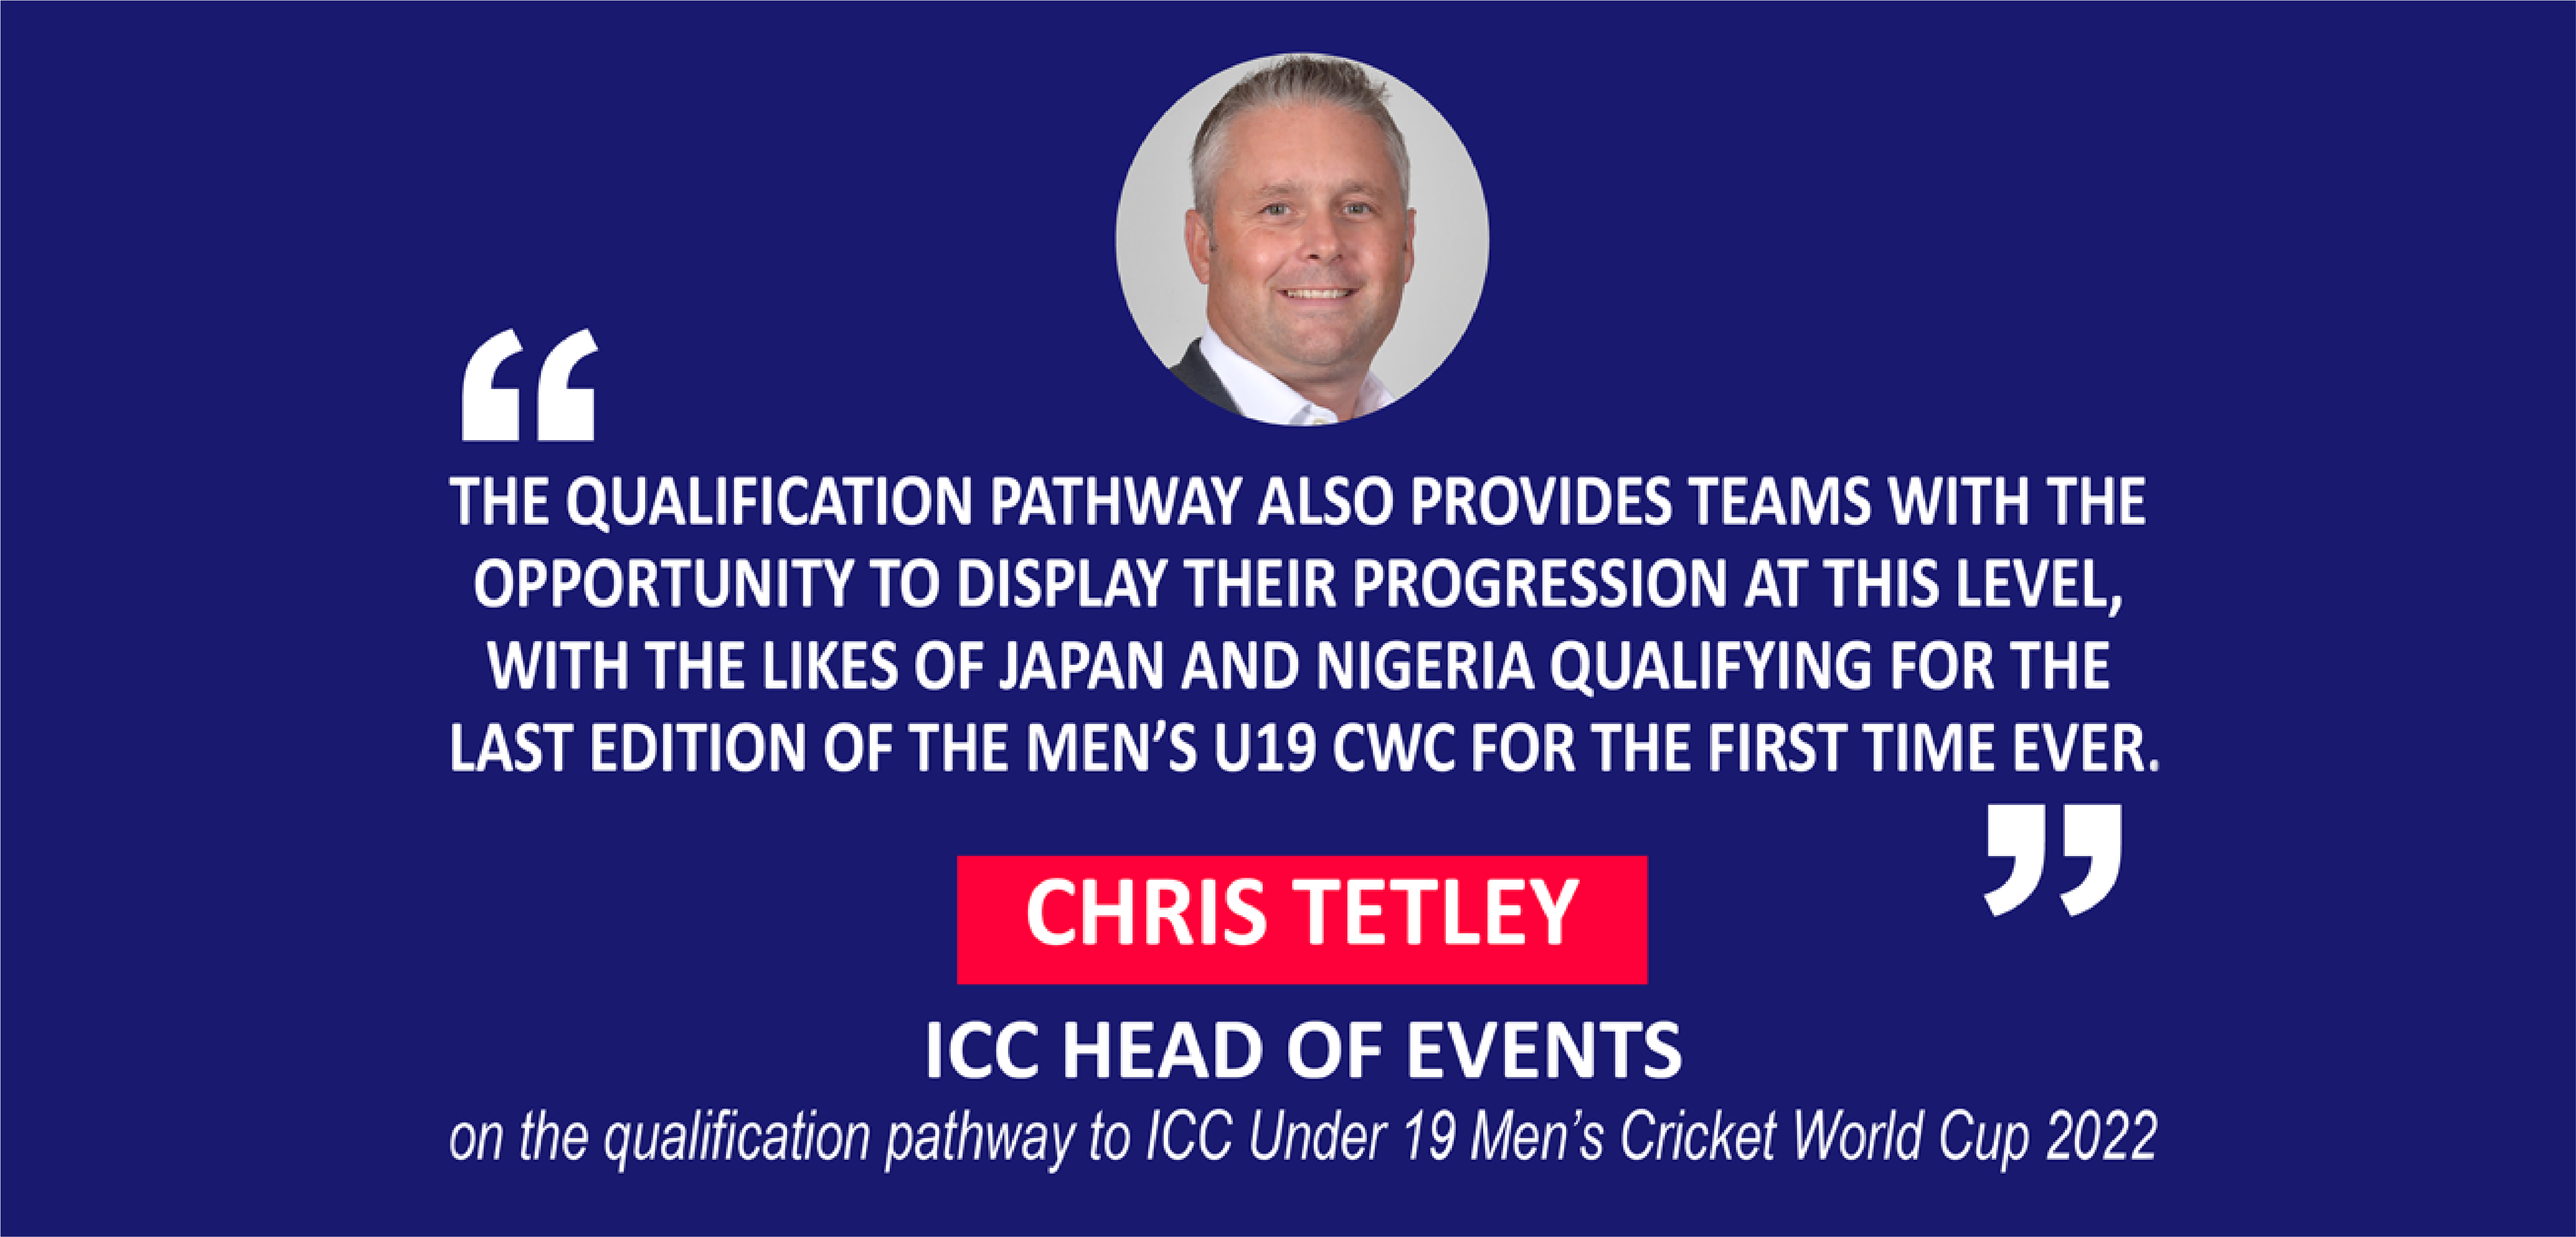 Chris Tetley, ICC Head of Events on the qualification pathway to ICC Under 19 Men’s Cricket World Cup 2022